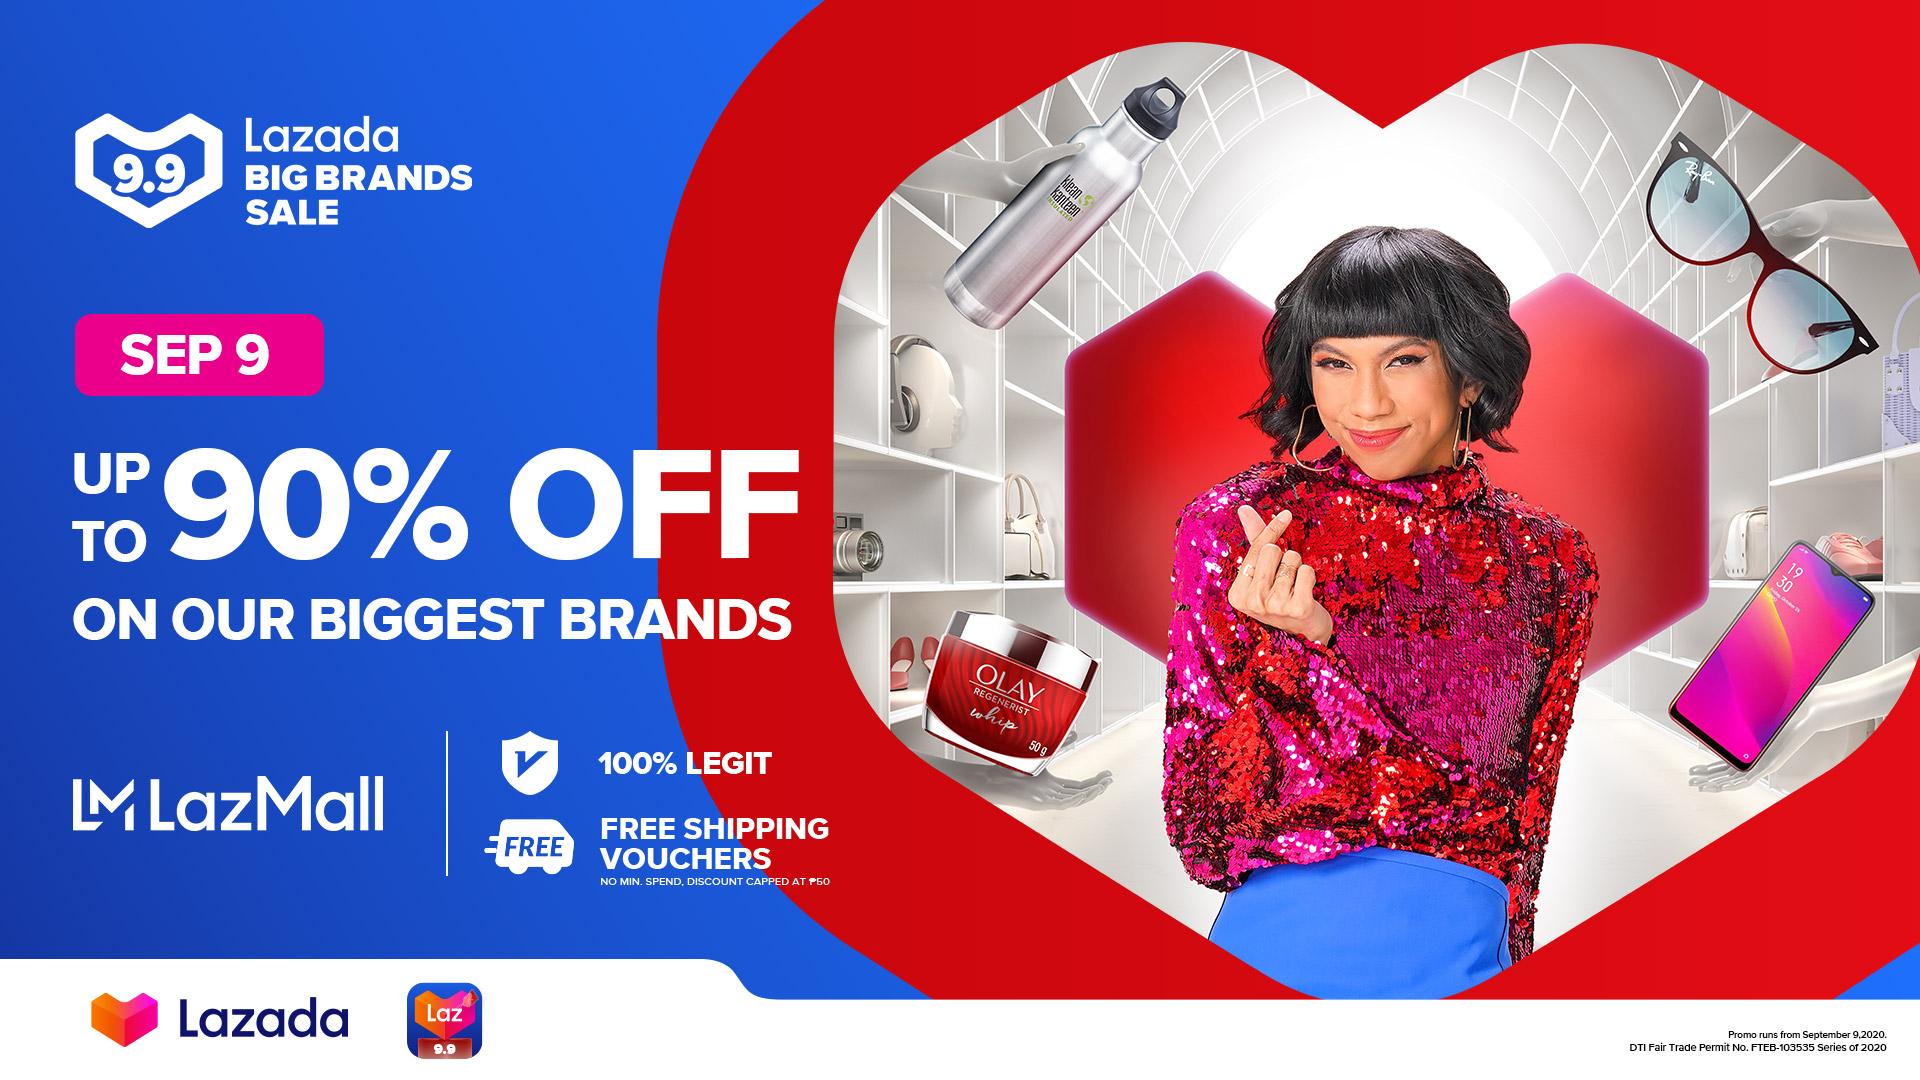 Haan Kaap schuif What are you waiting for? Get all the brands you love at Lazada's 9.9 Big  Brands Sale! | GMA News Online